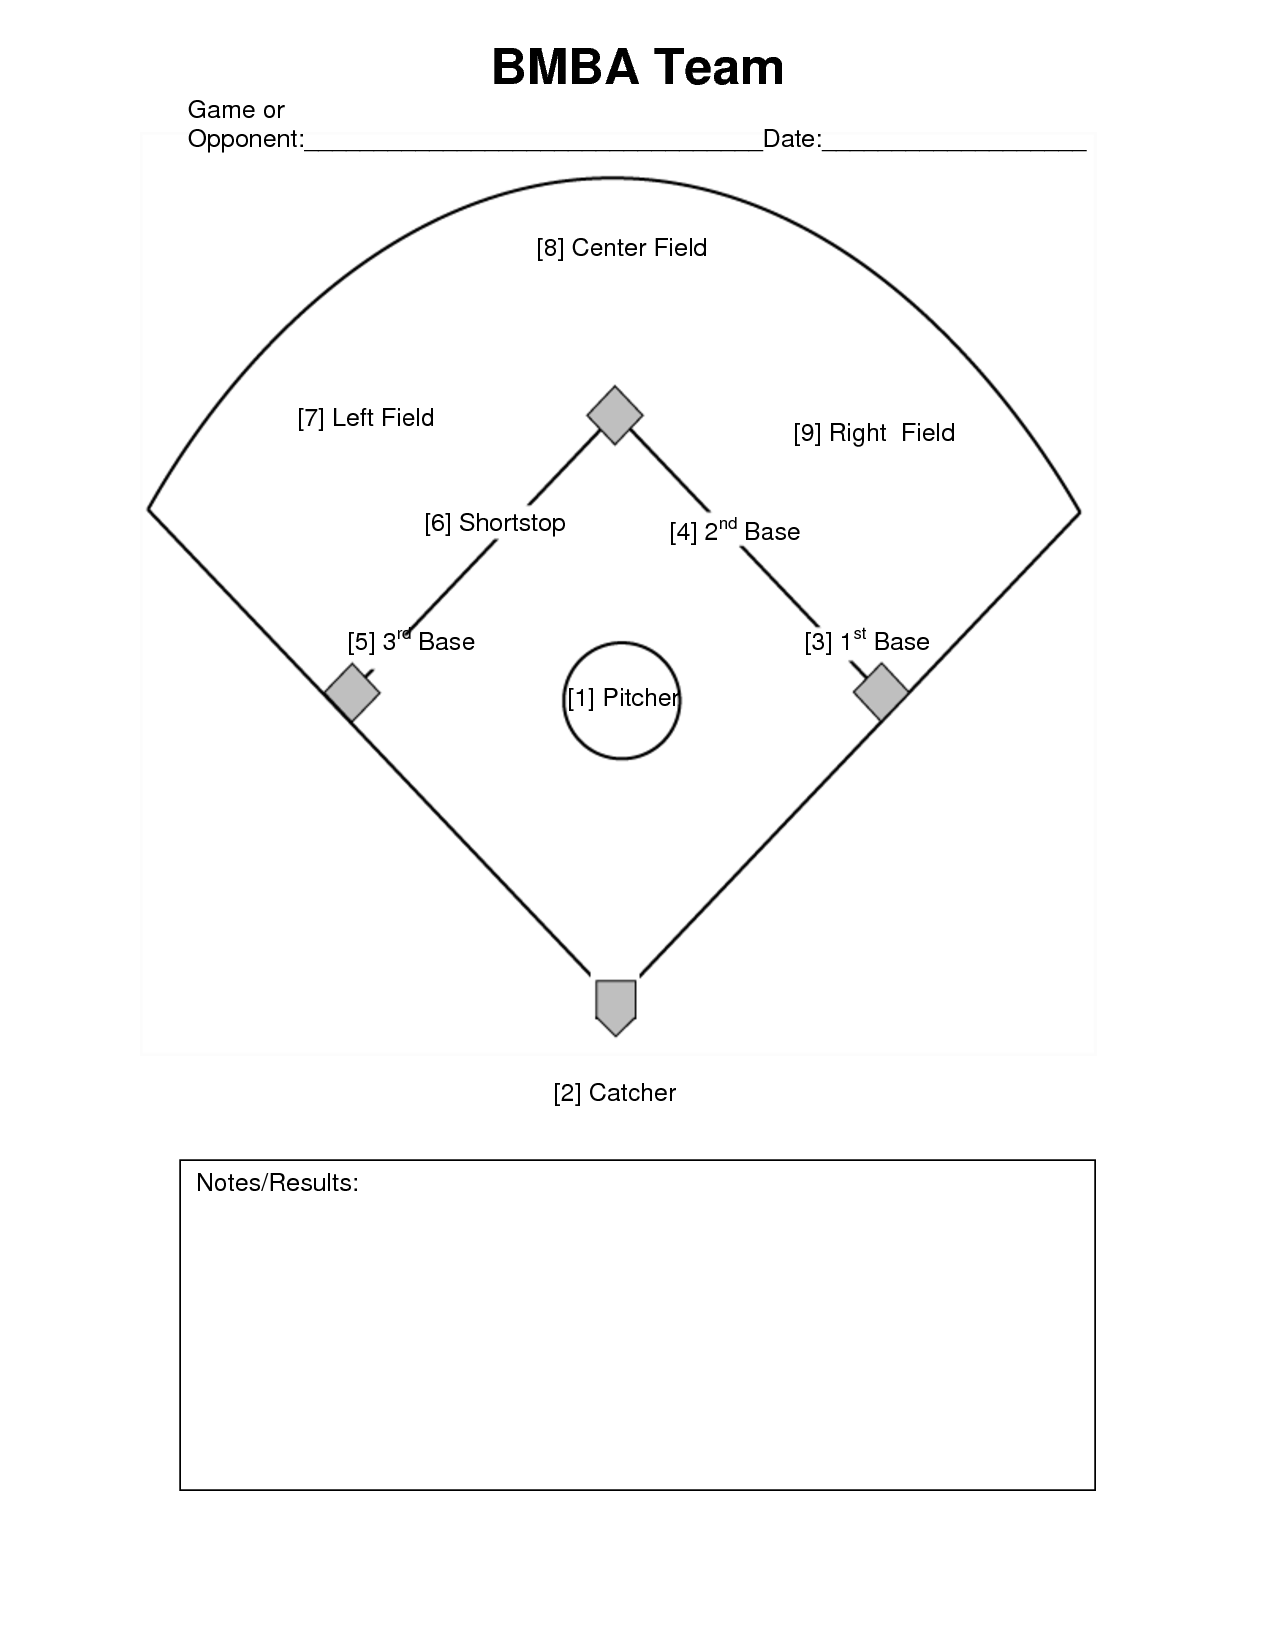 Free Baseball Positions Diagram, Download Free Baseball Positions Diagram png images, Free